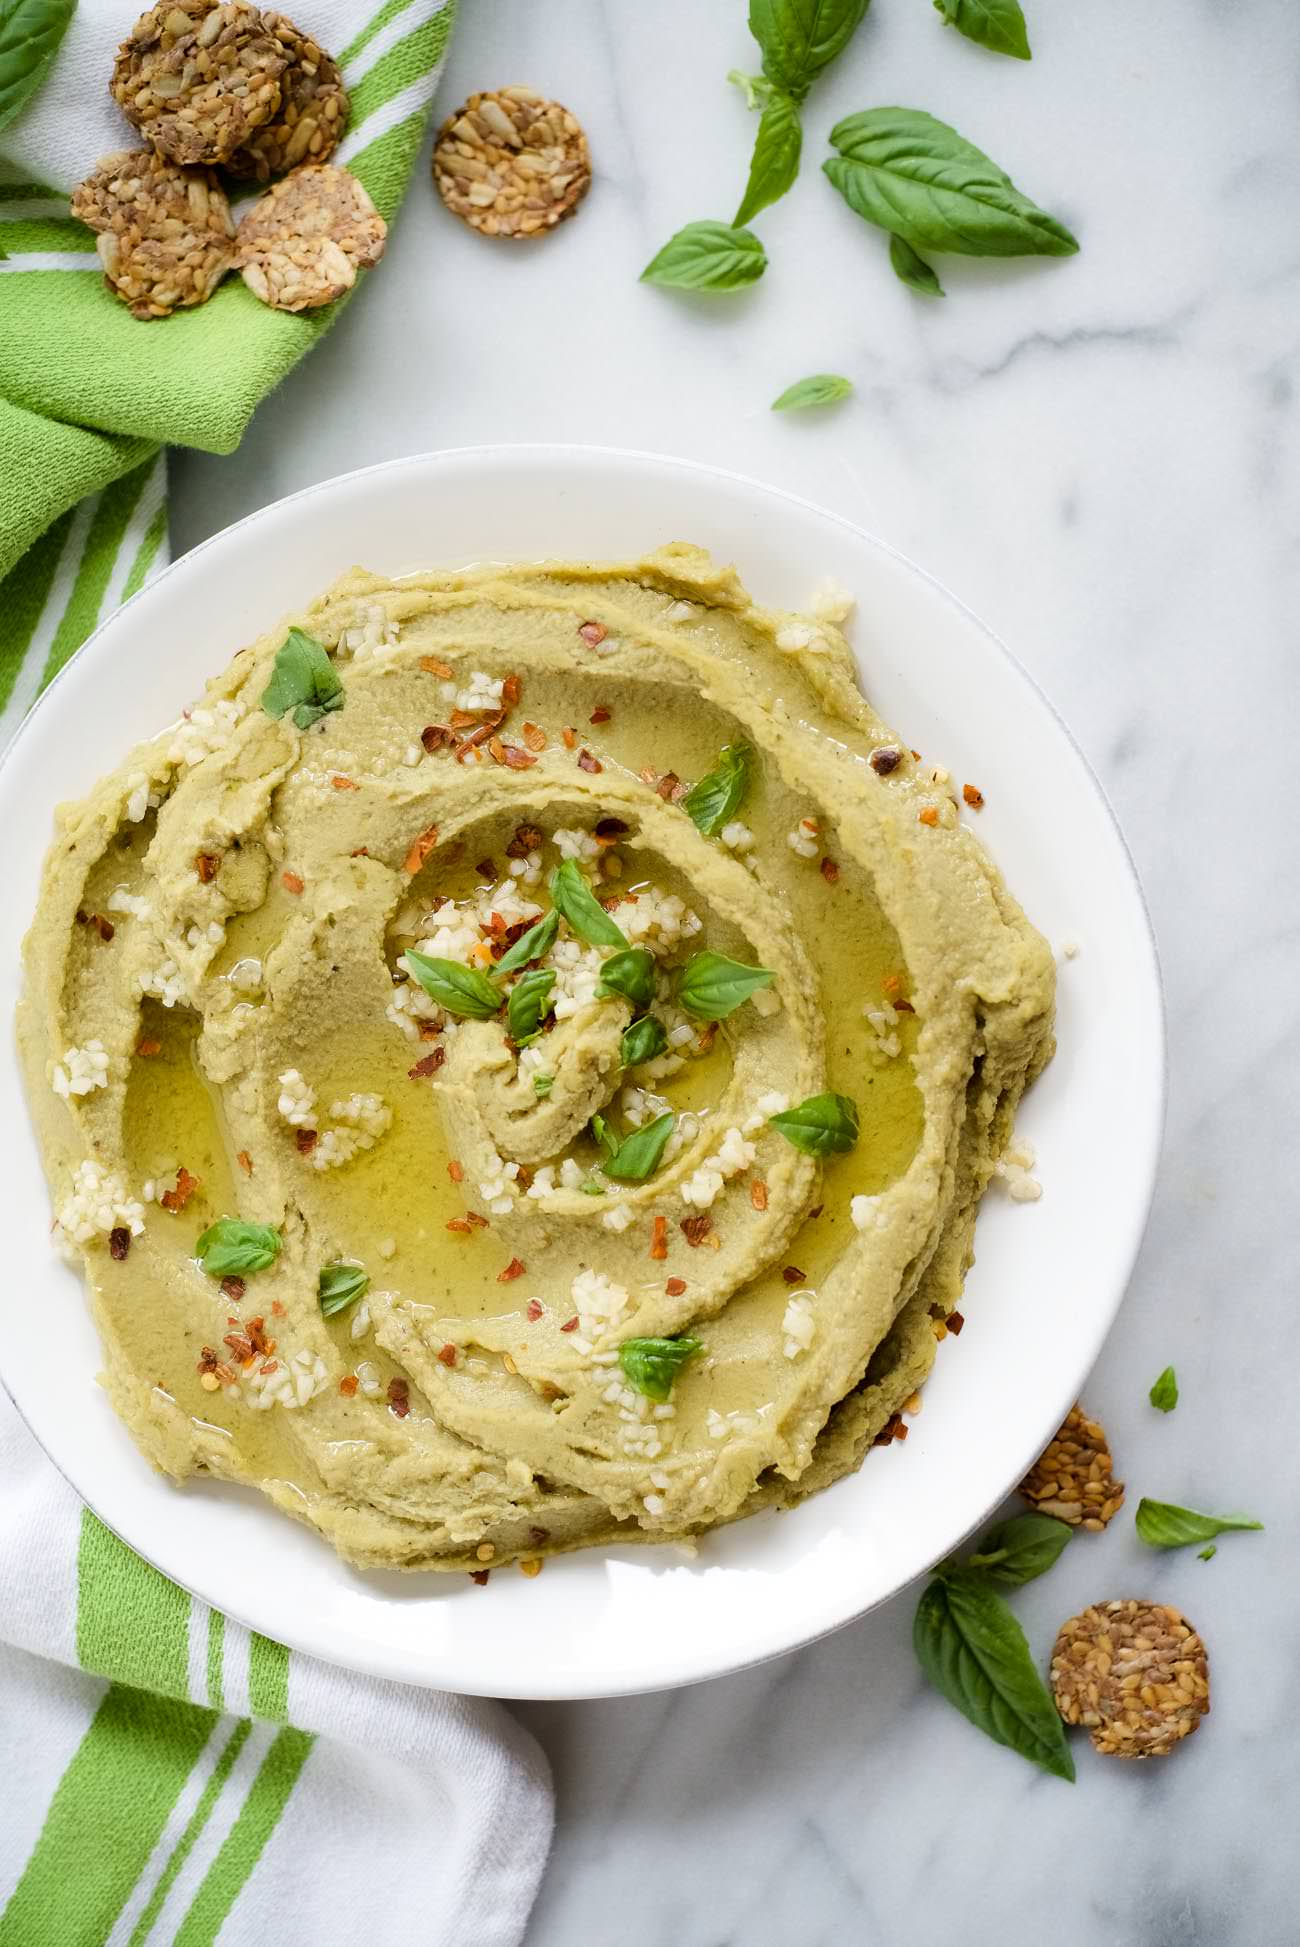 Spicy Basil Hummus is so delicious and with only 7 ingredients, it couldn't be easier to make! Fresh basil, chickpeas and a touch of red pepper take this classic hummus up a few notches!